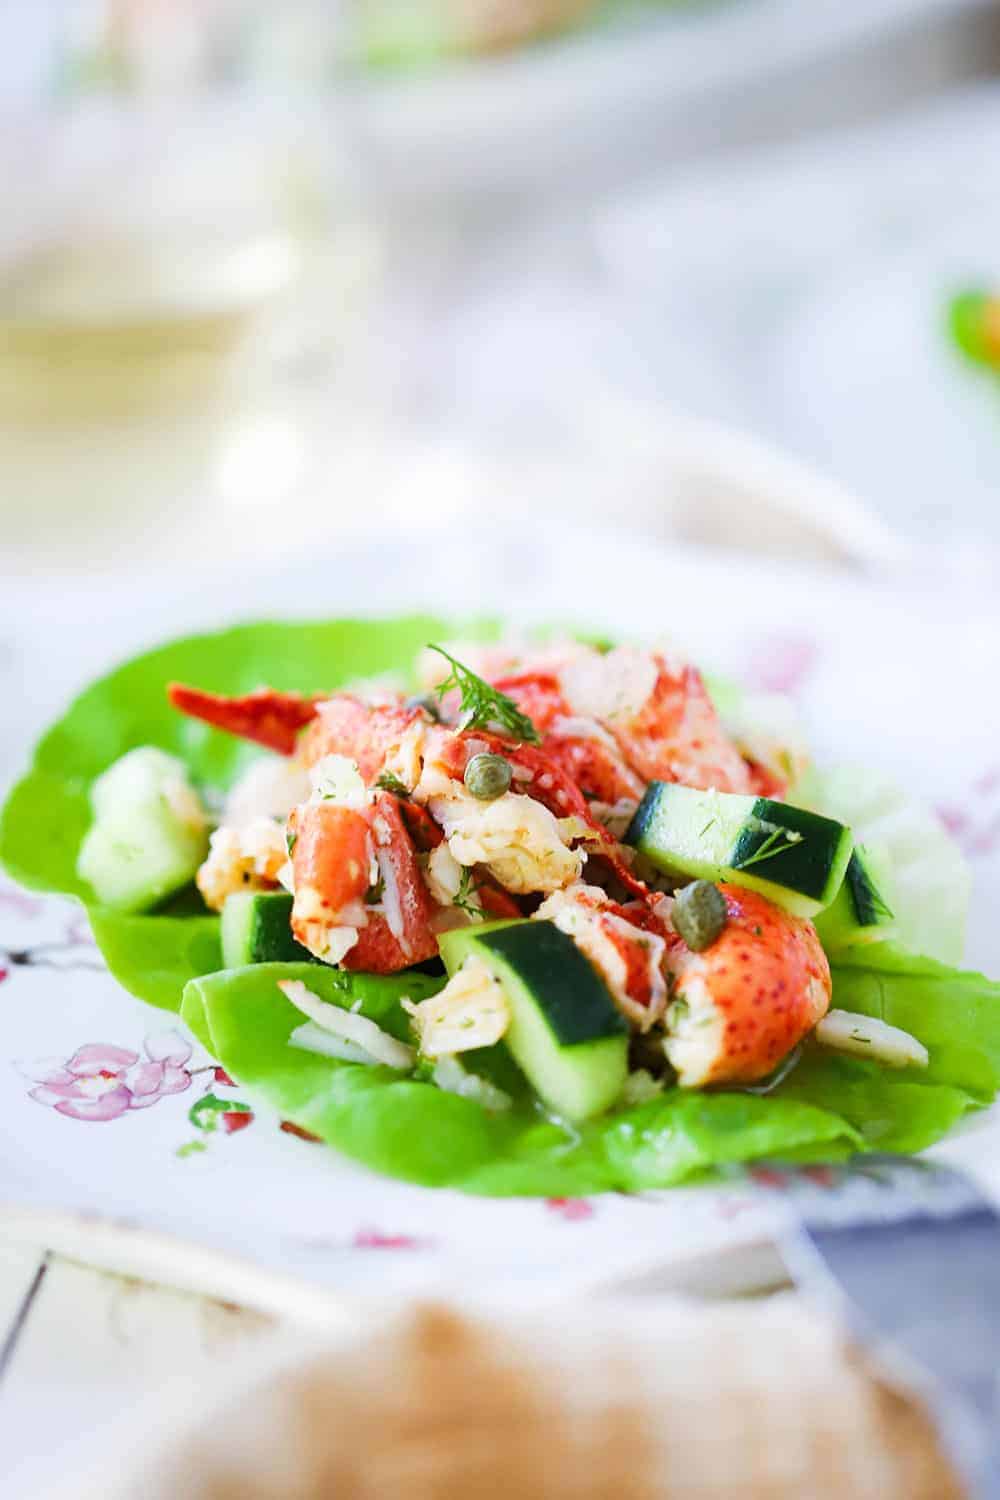 A close-up view of a lobster salad with cucumbers on a green leaf of lettuce on a decorative plate.